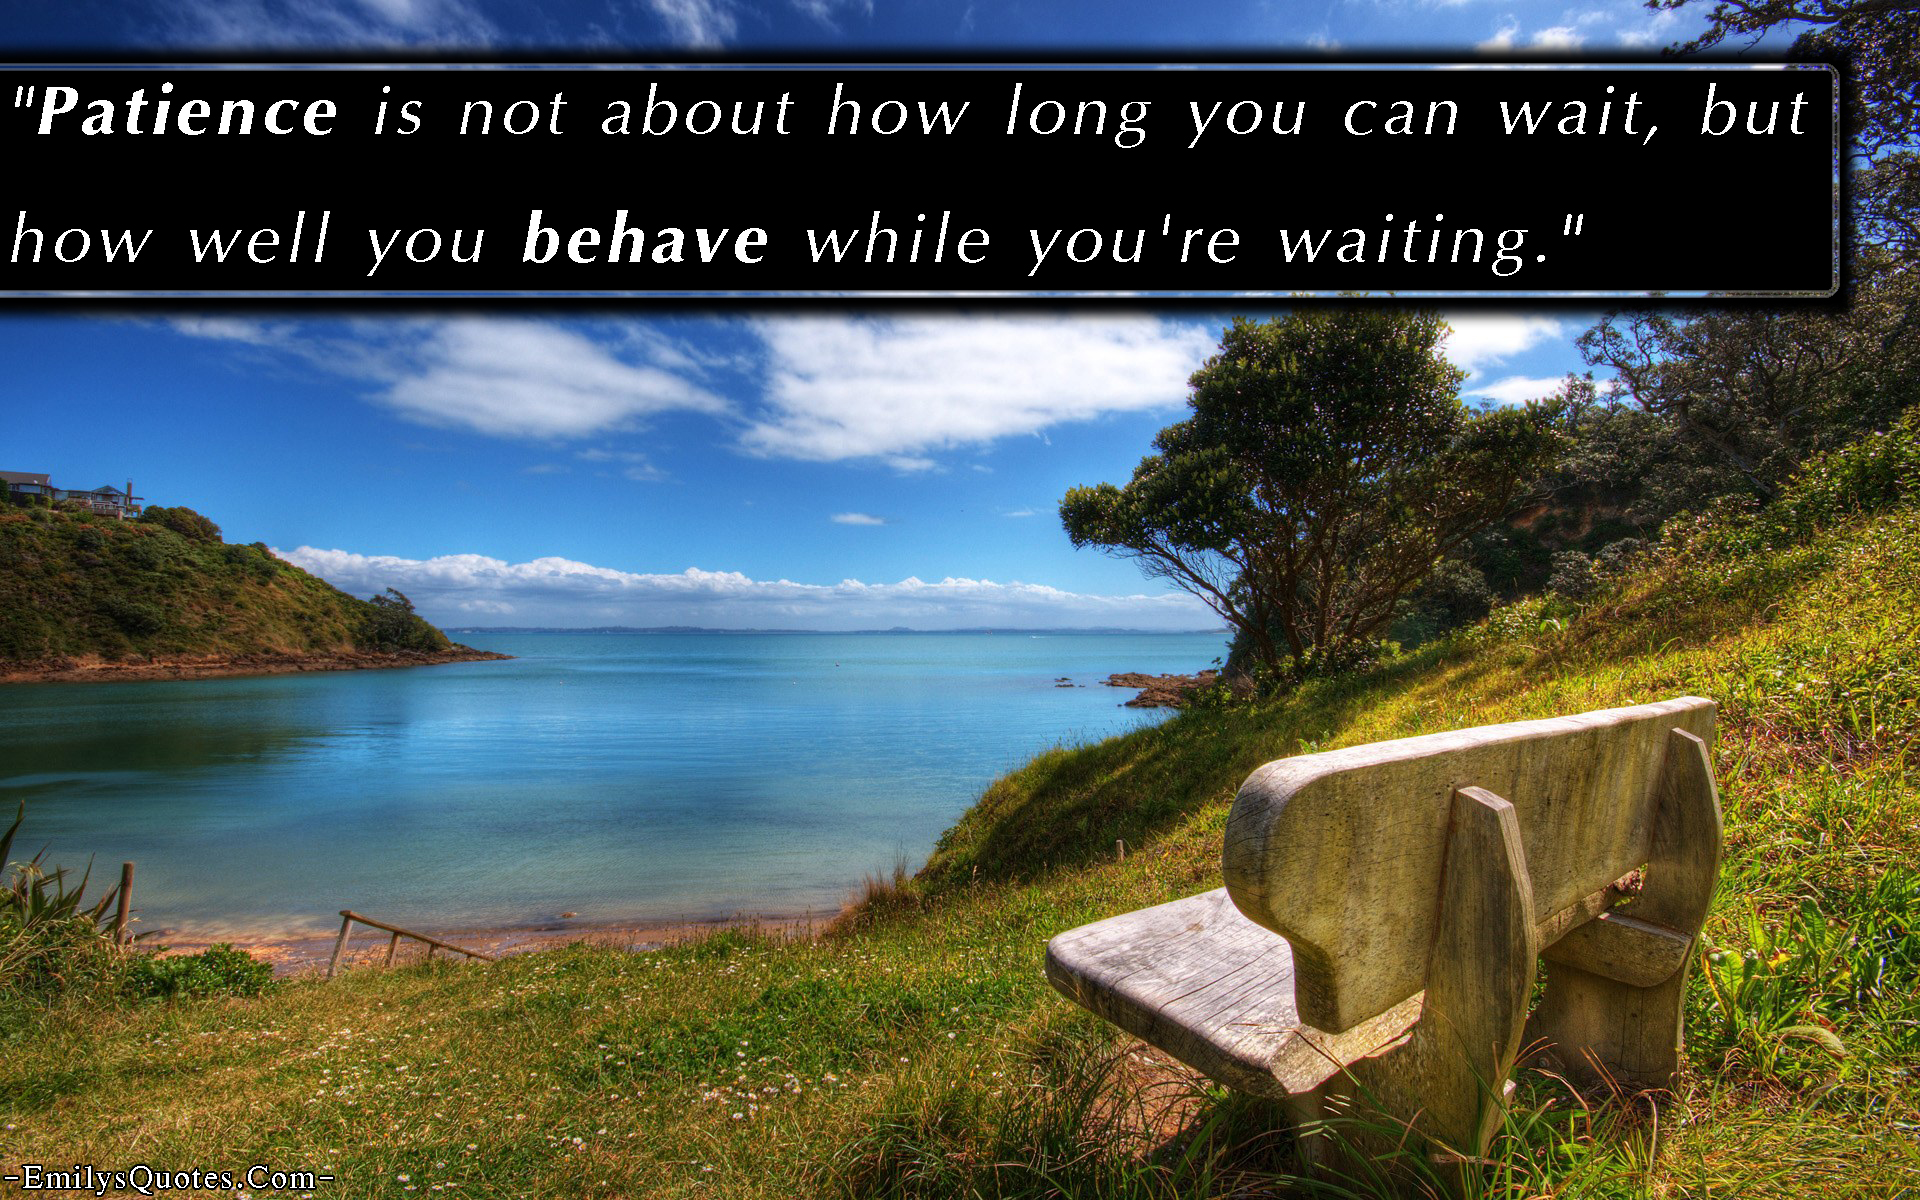 Patience is not about how long you can wait, but how well you behave while you’re waiting